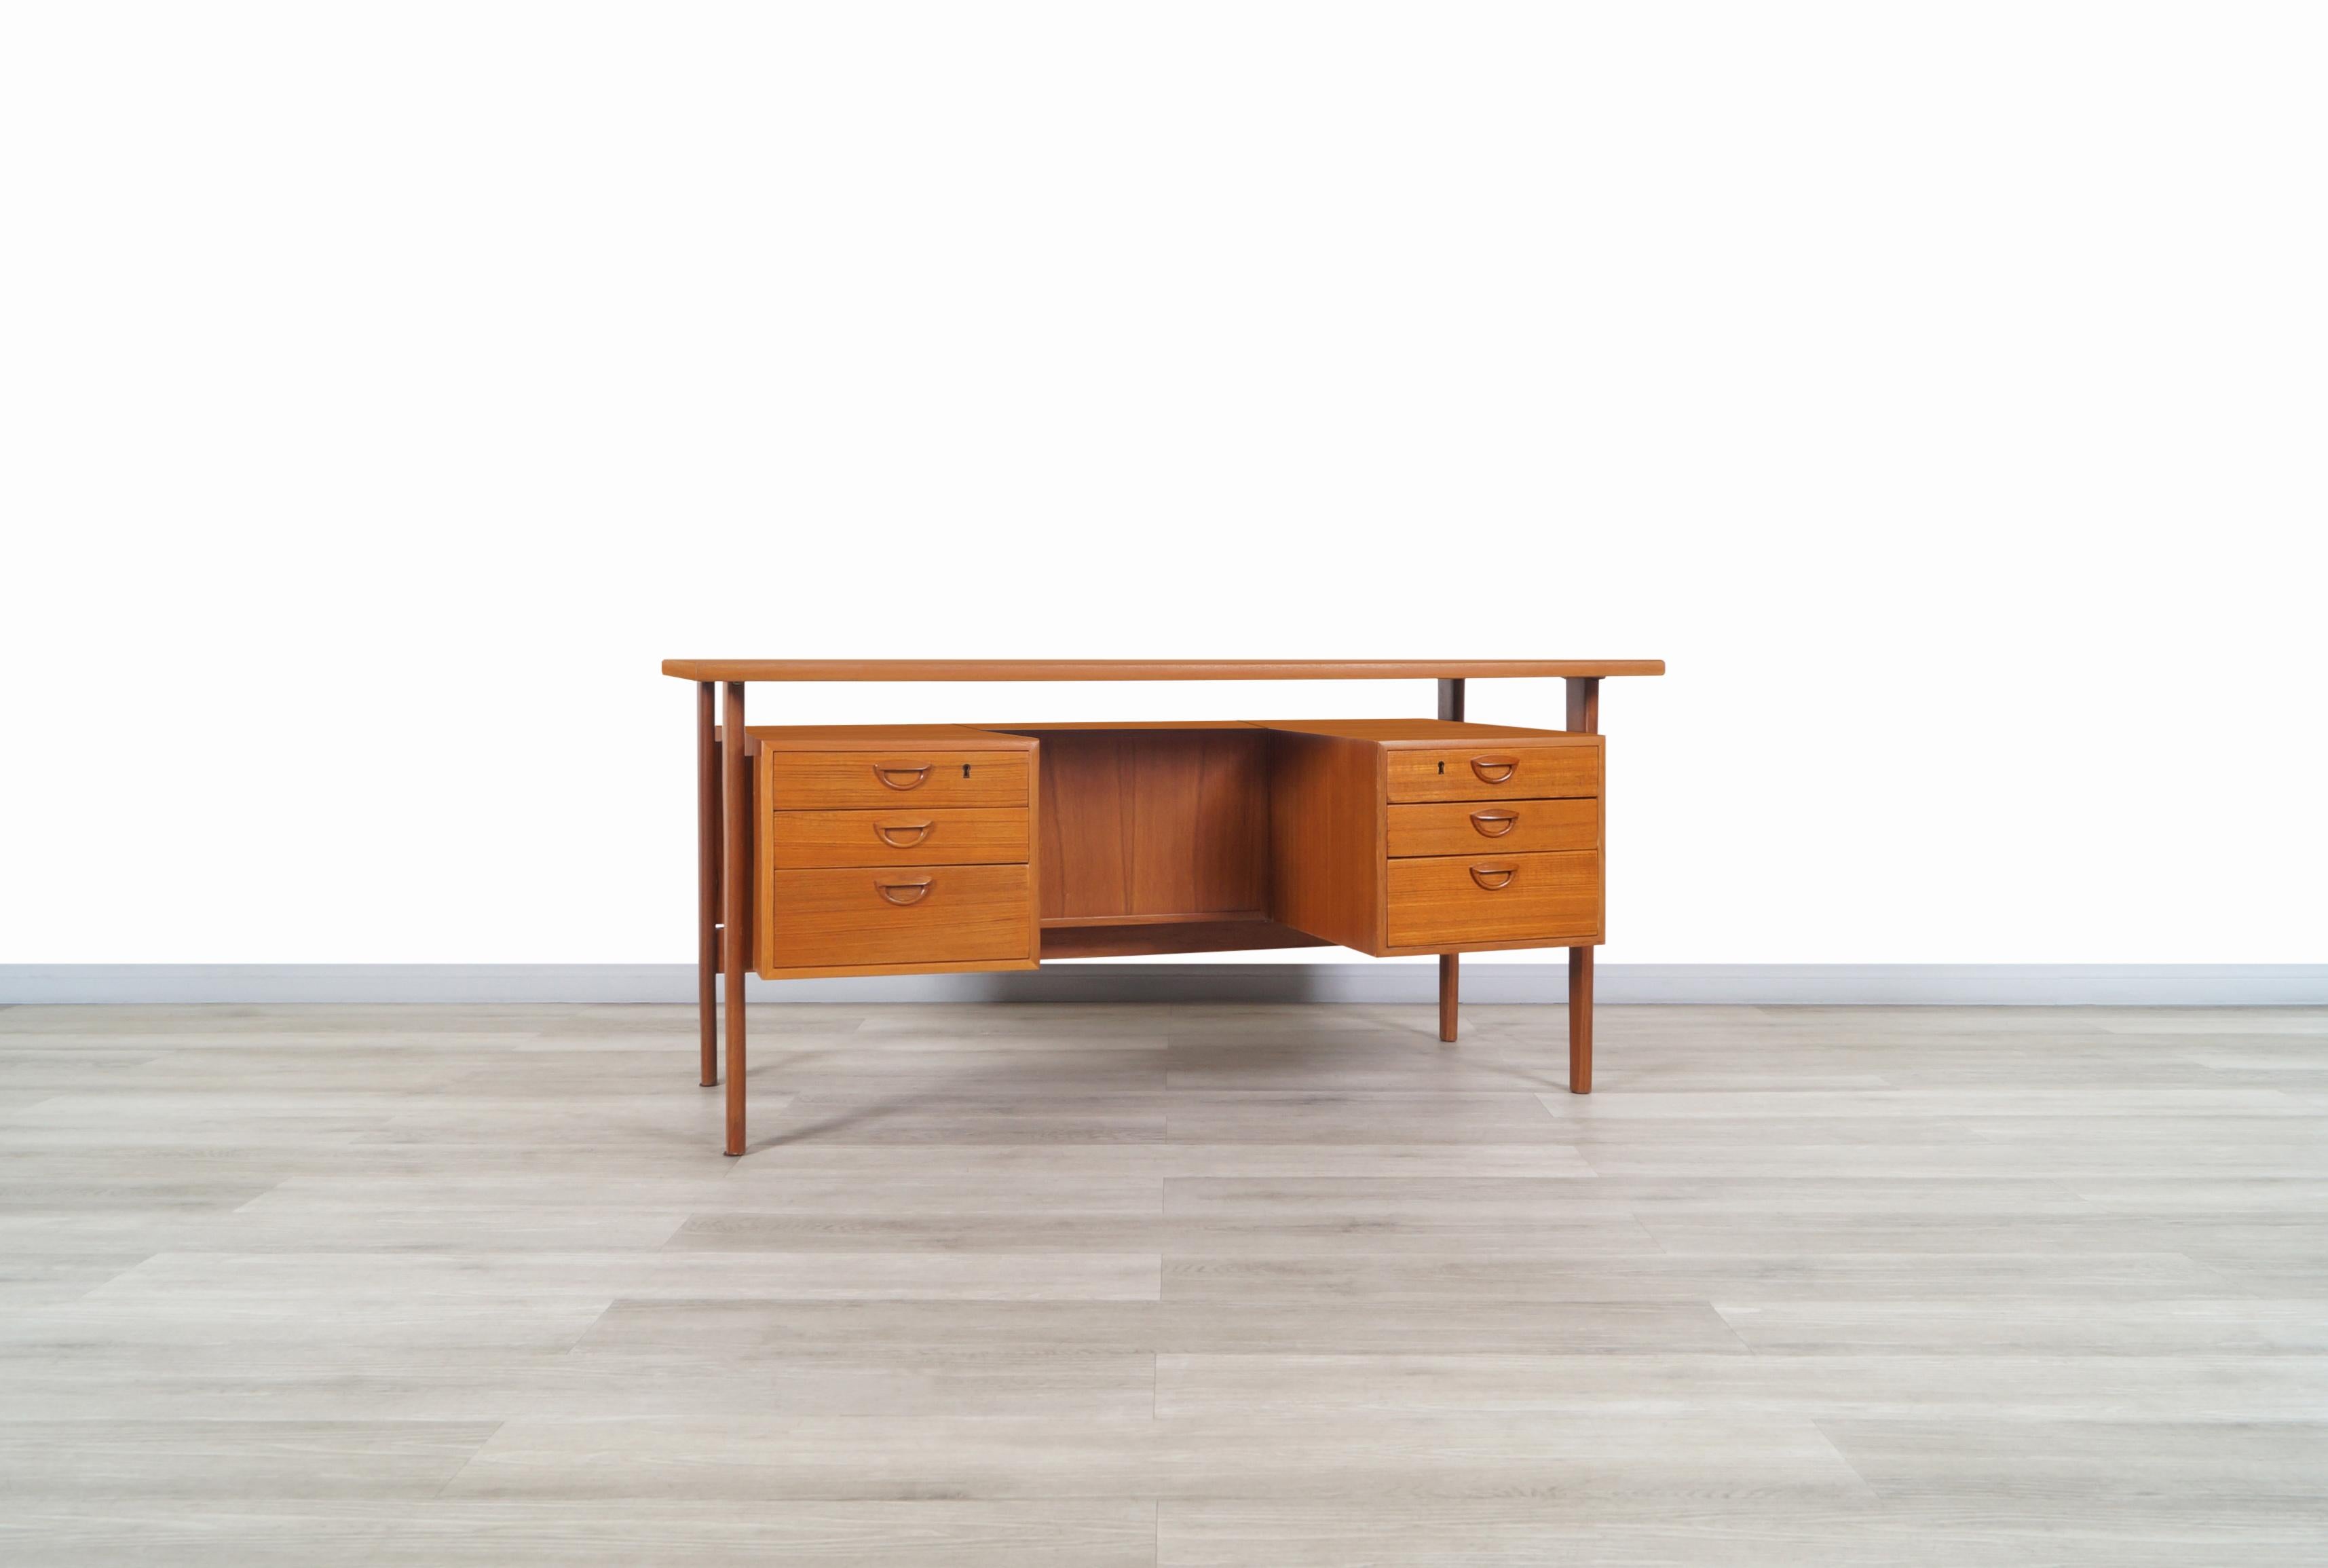 Amazing Danish modern floating top desk designed by Kai Kristiansen for Feldballes Møbelfrabrik in Denmark, circa 1960s. This desk is also known as model FM60. It represents one of the most coveted Scandinavian designs of the time. It’s made of teak